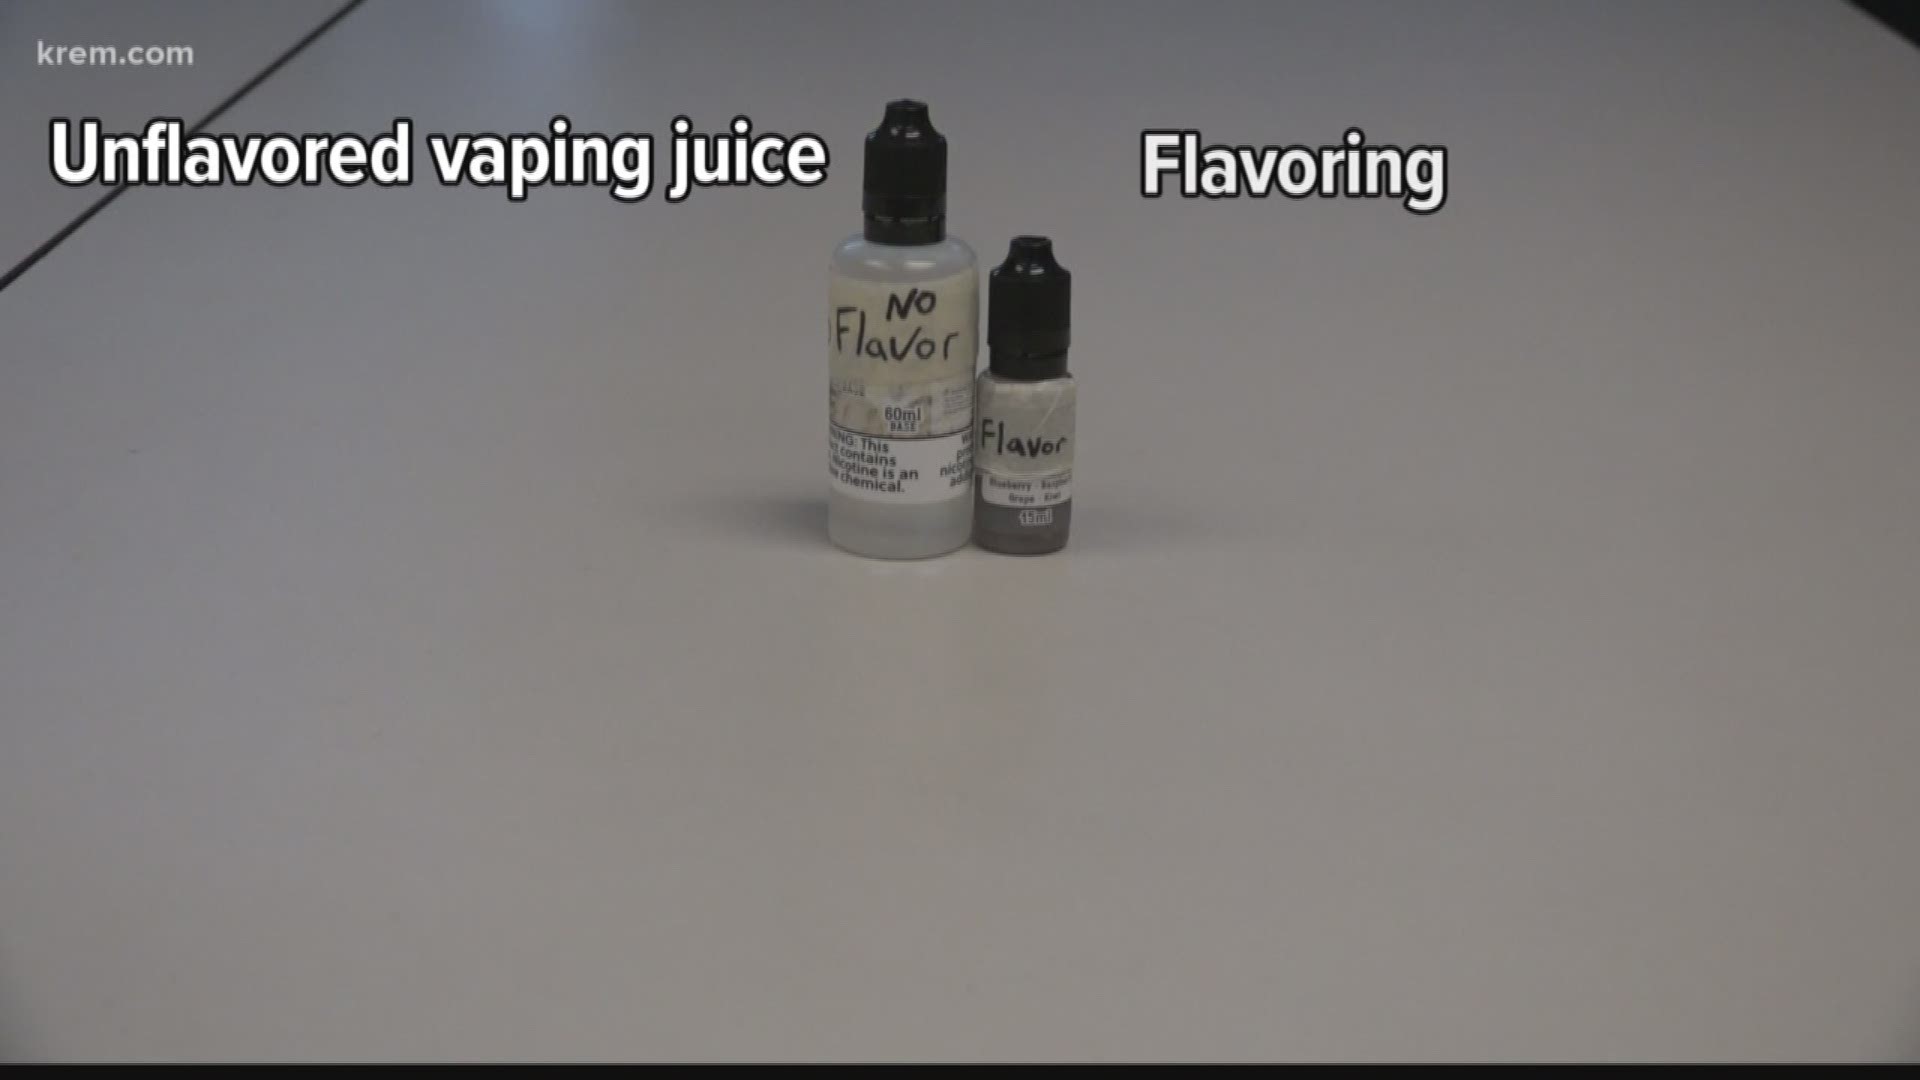 A KREM investigation found multiple vaping shops in Spokane are selling unflavored vaping juice and flavoring that can be mixed together.